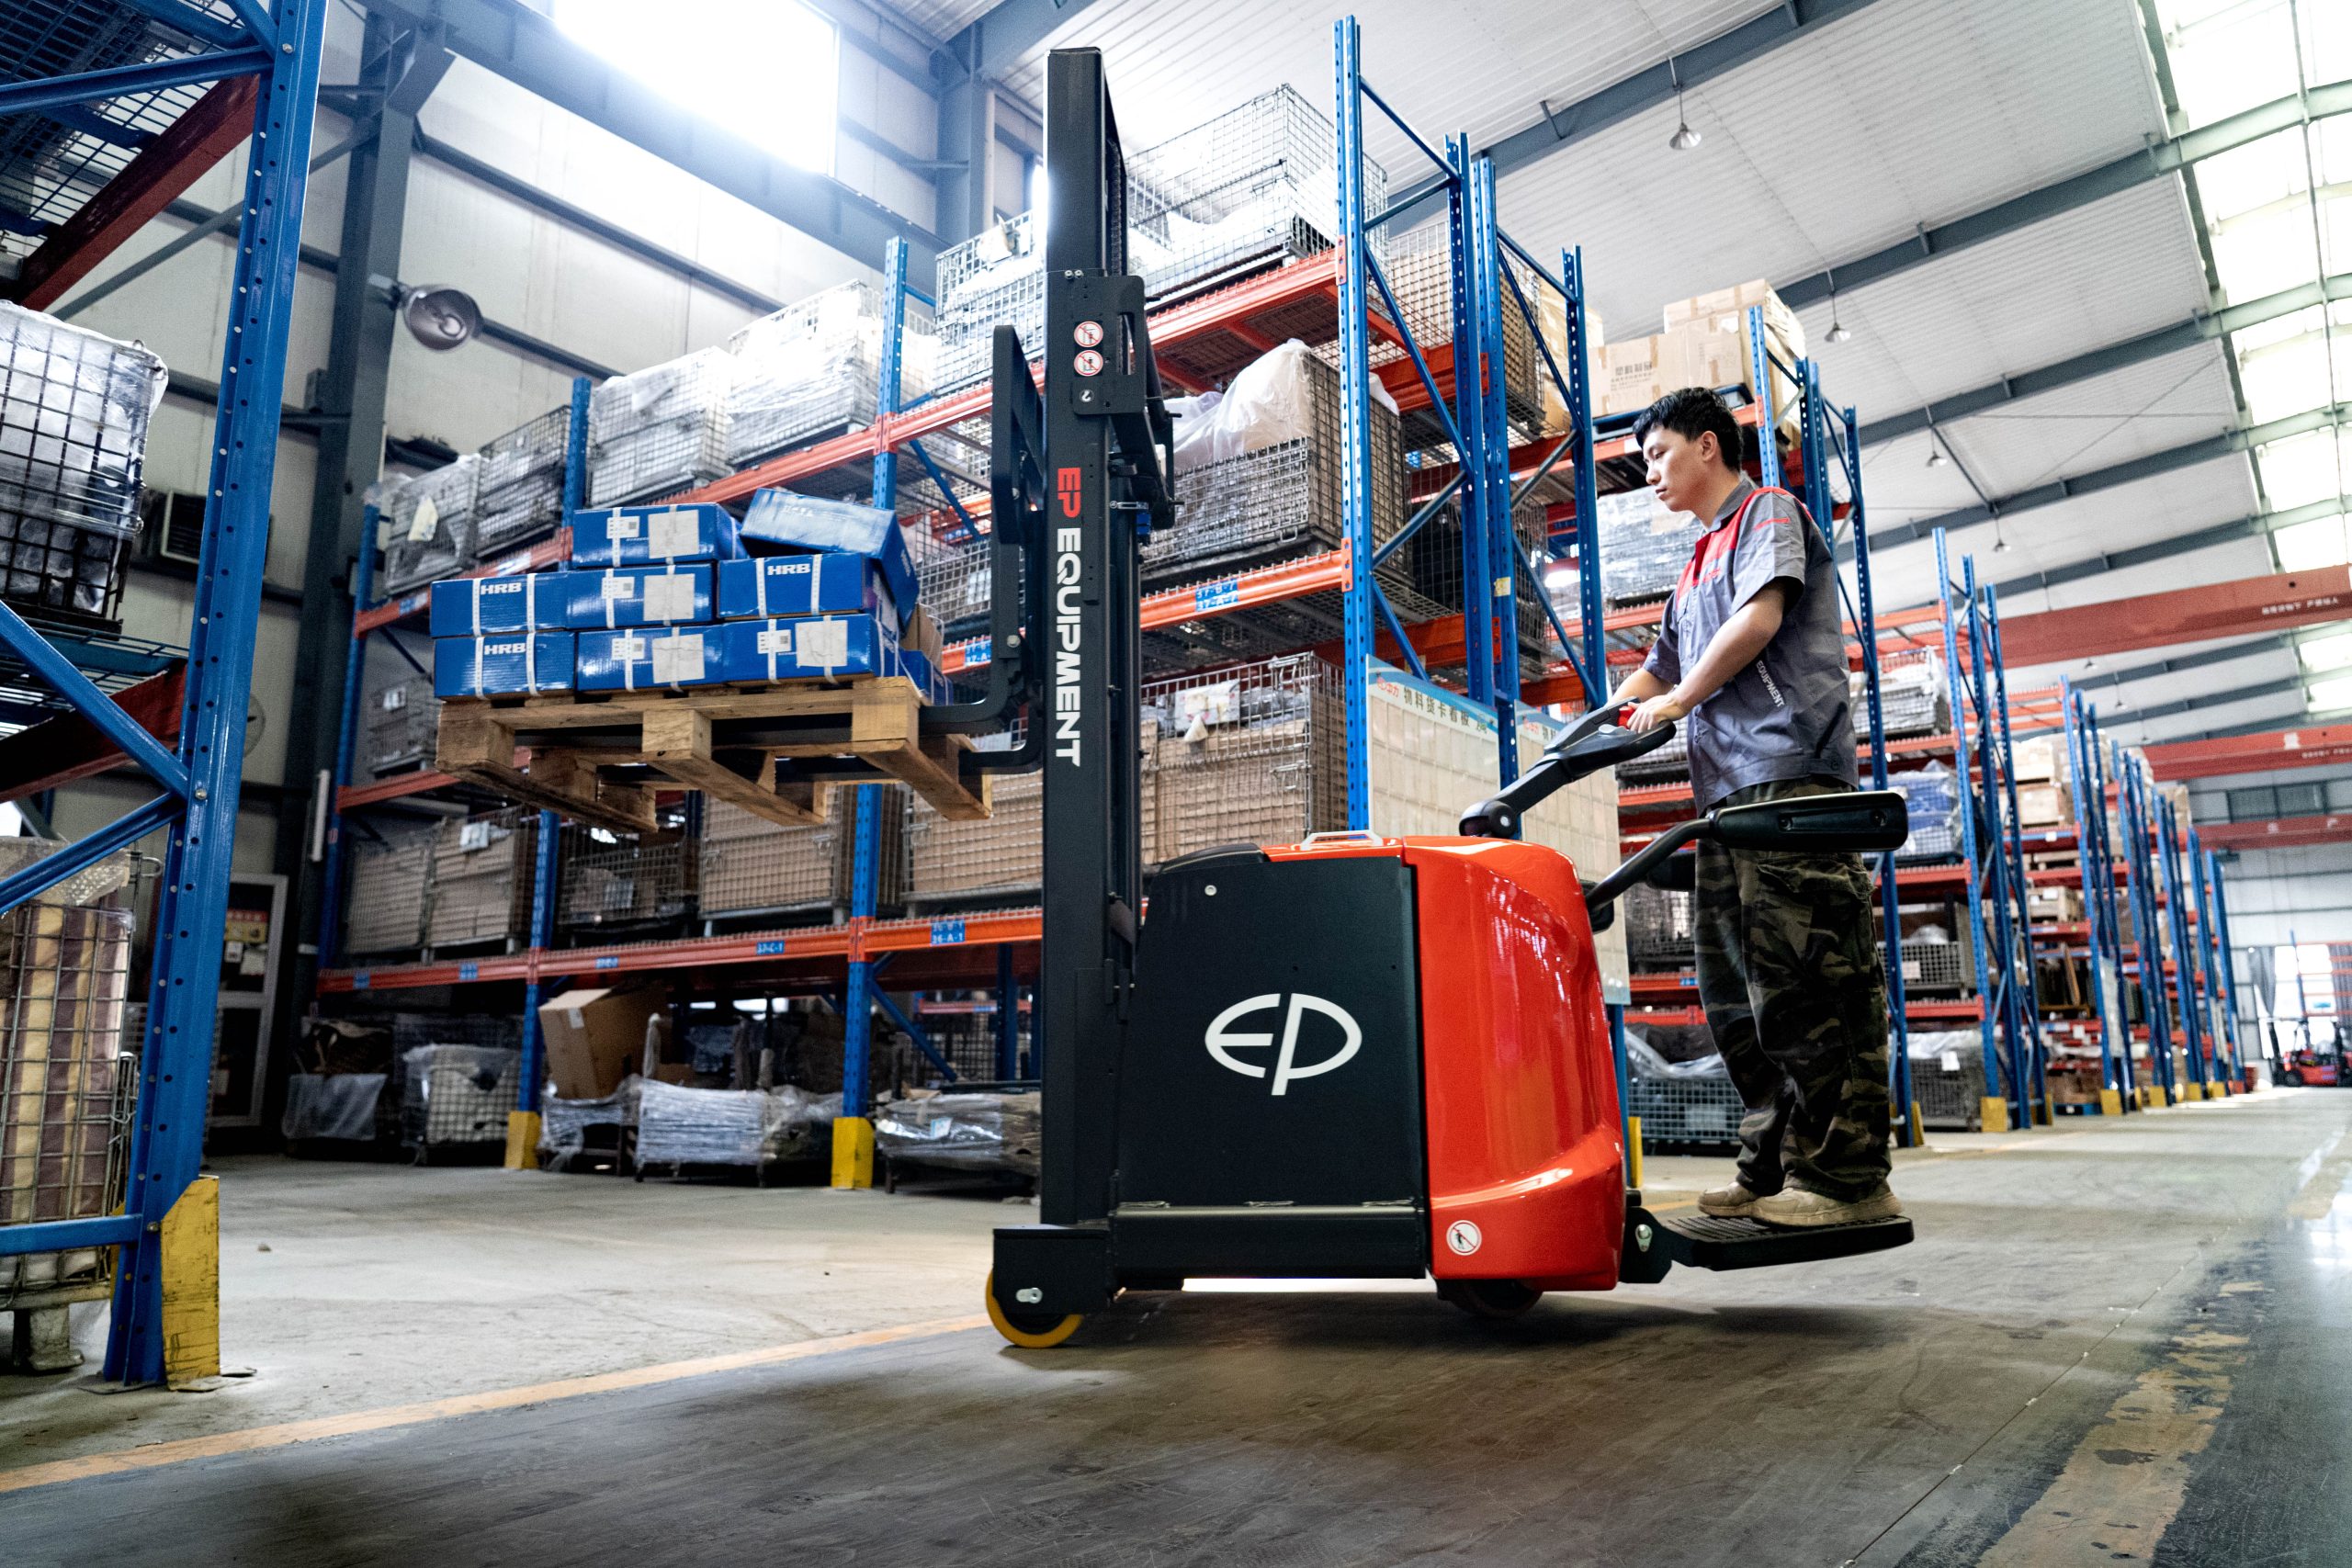 ES16-RS/RSI electric ride-on pallet stacker being operated with a operator riding on it.